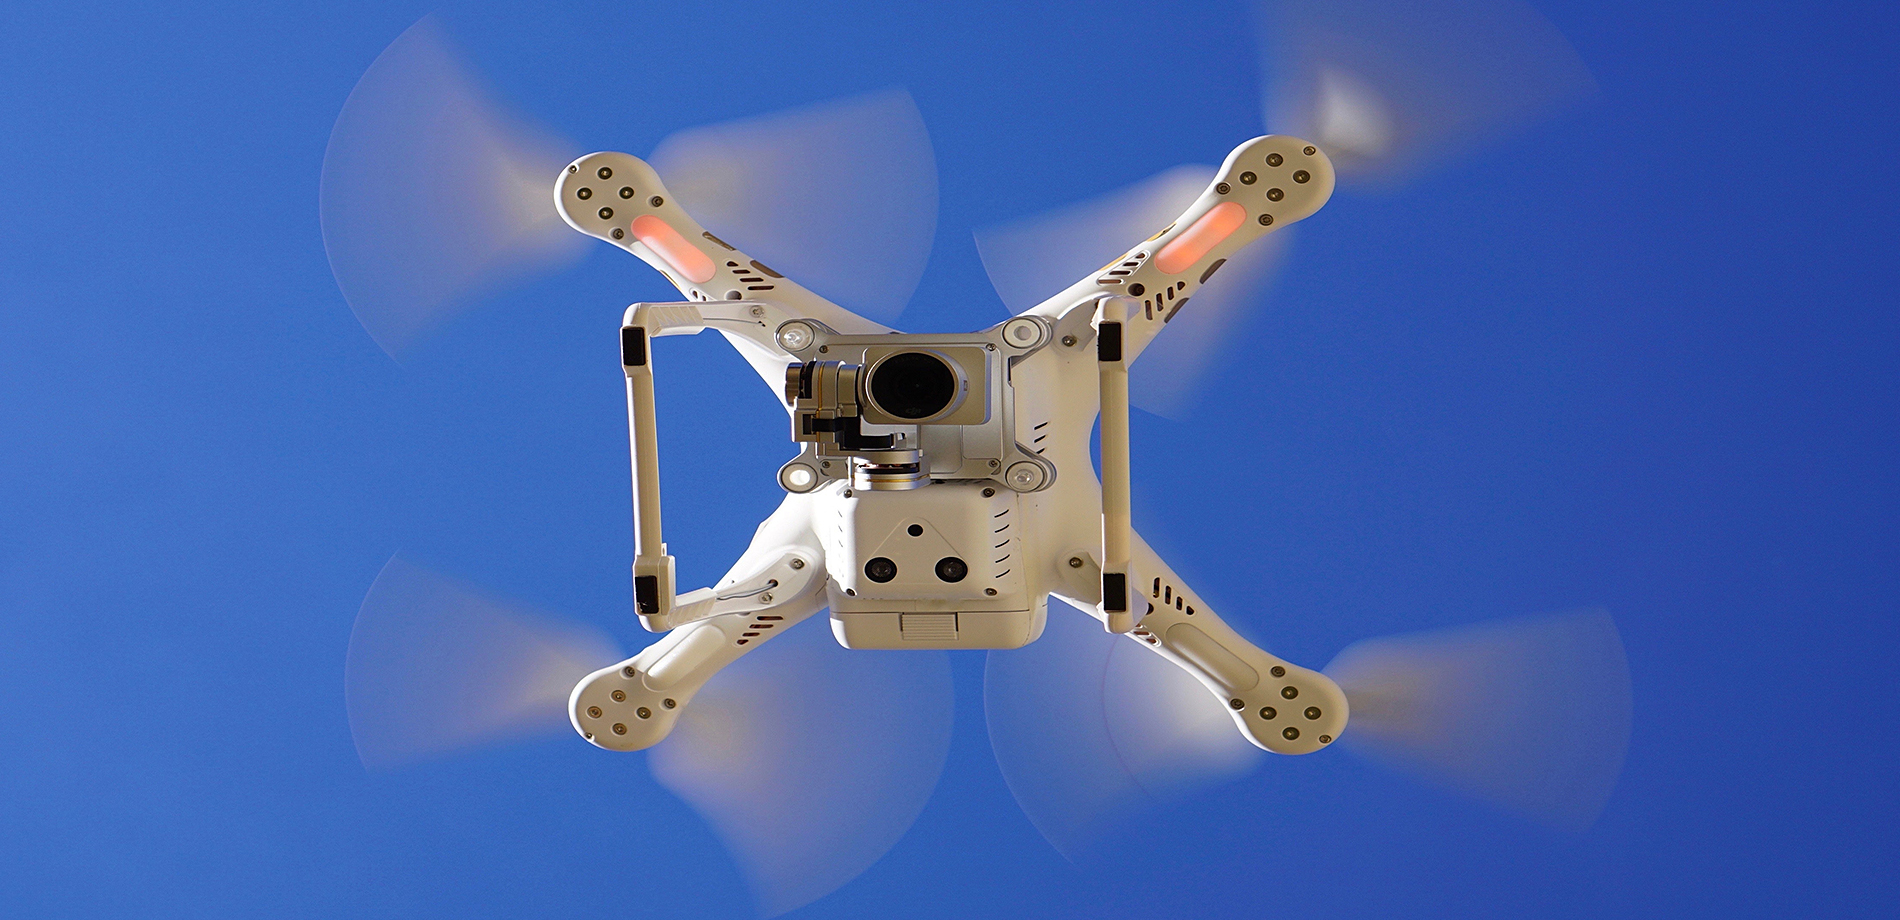 Talk to us about filming with drones